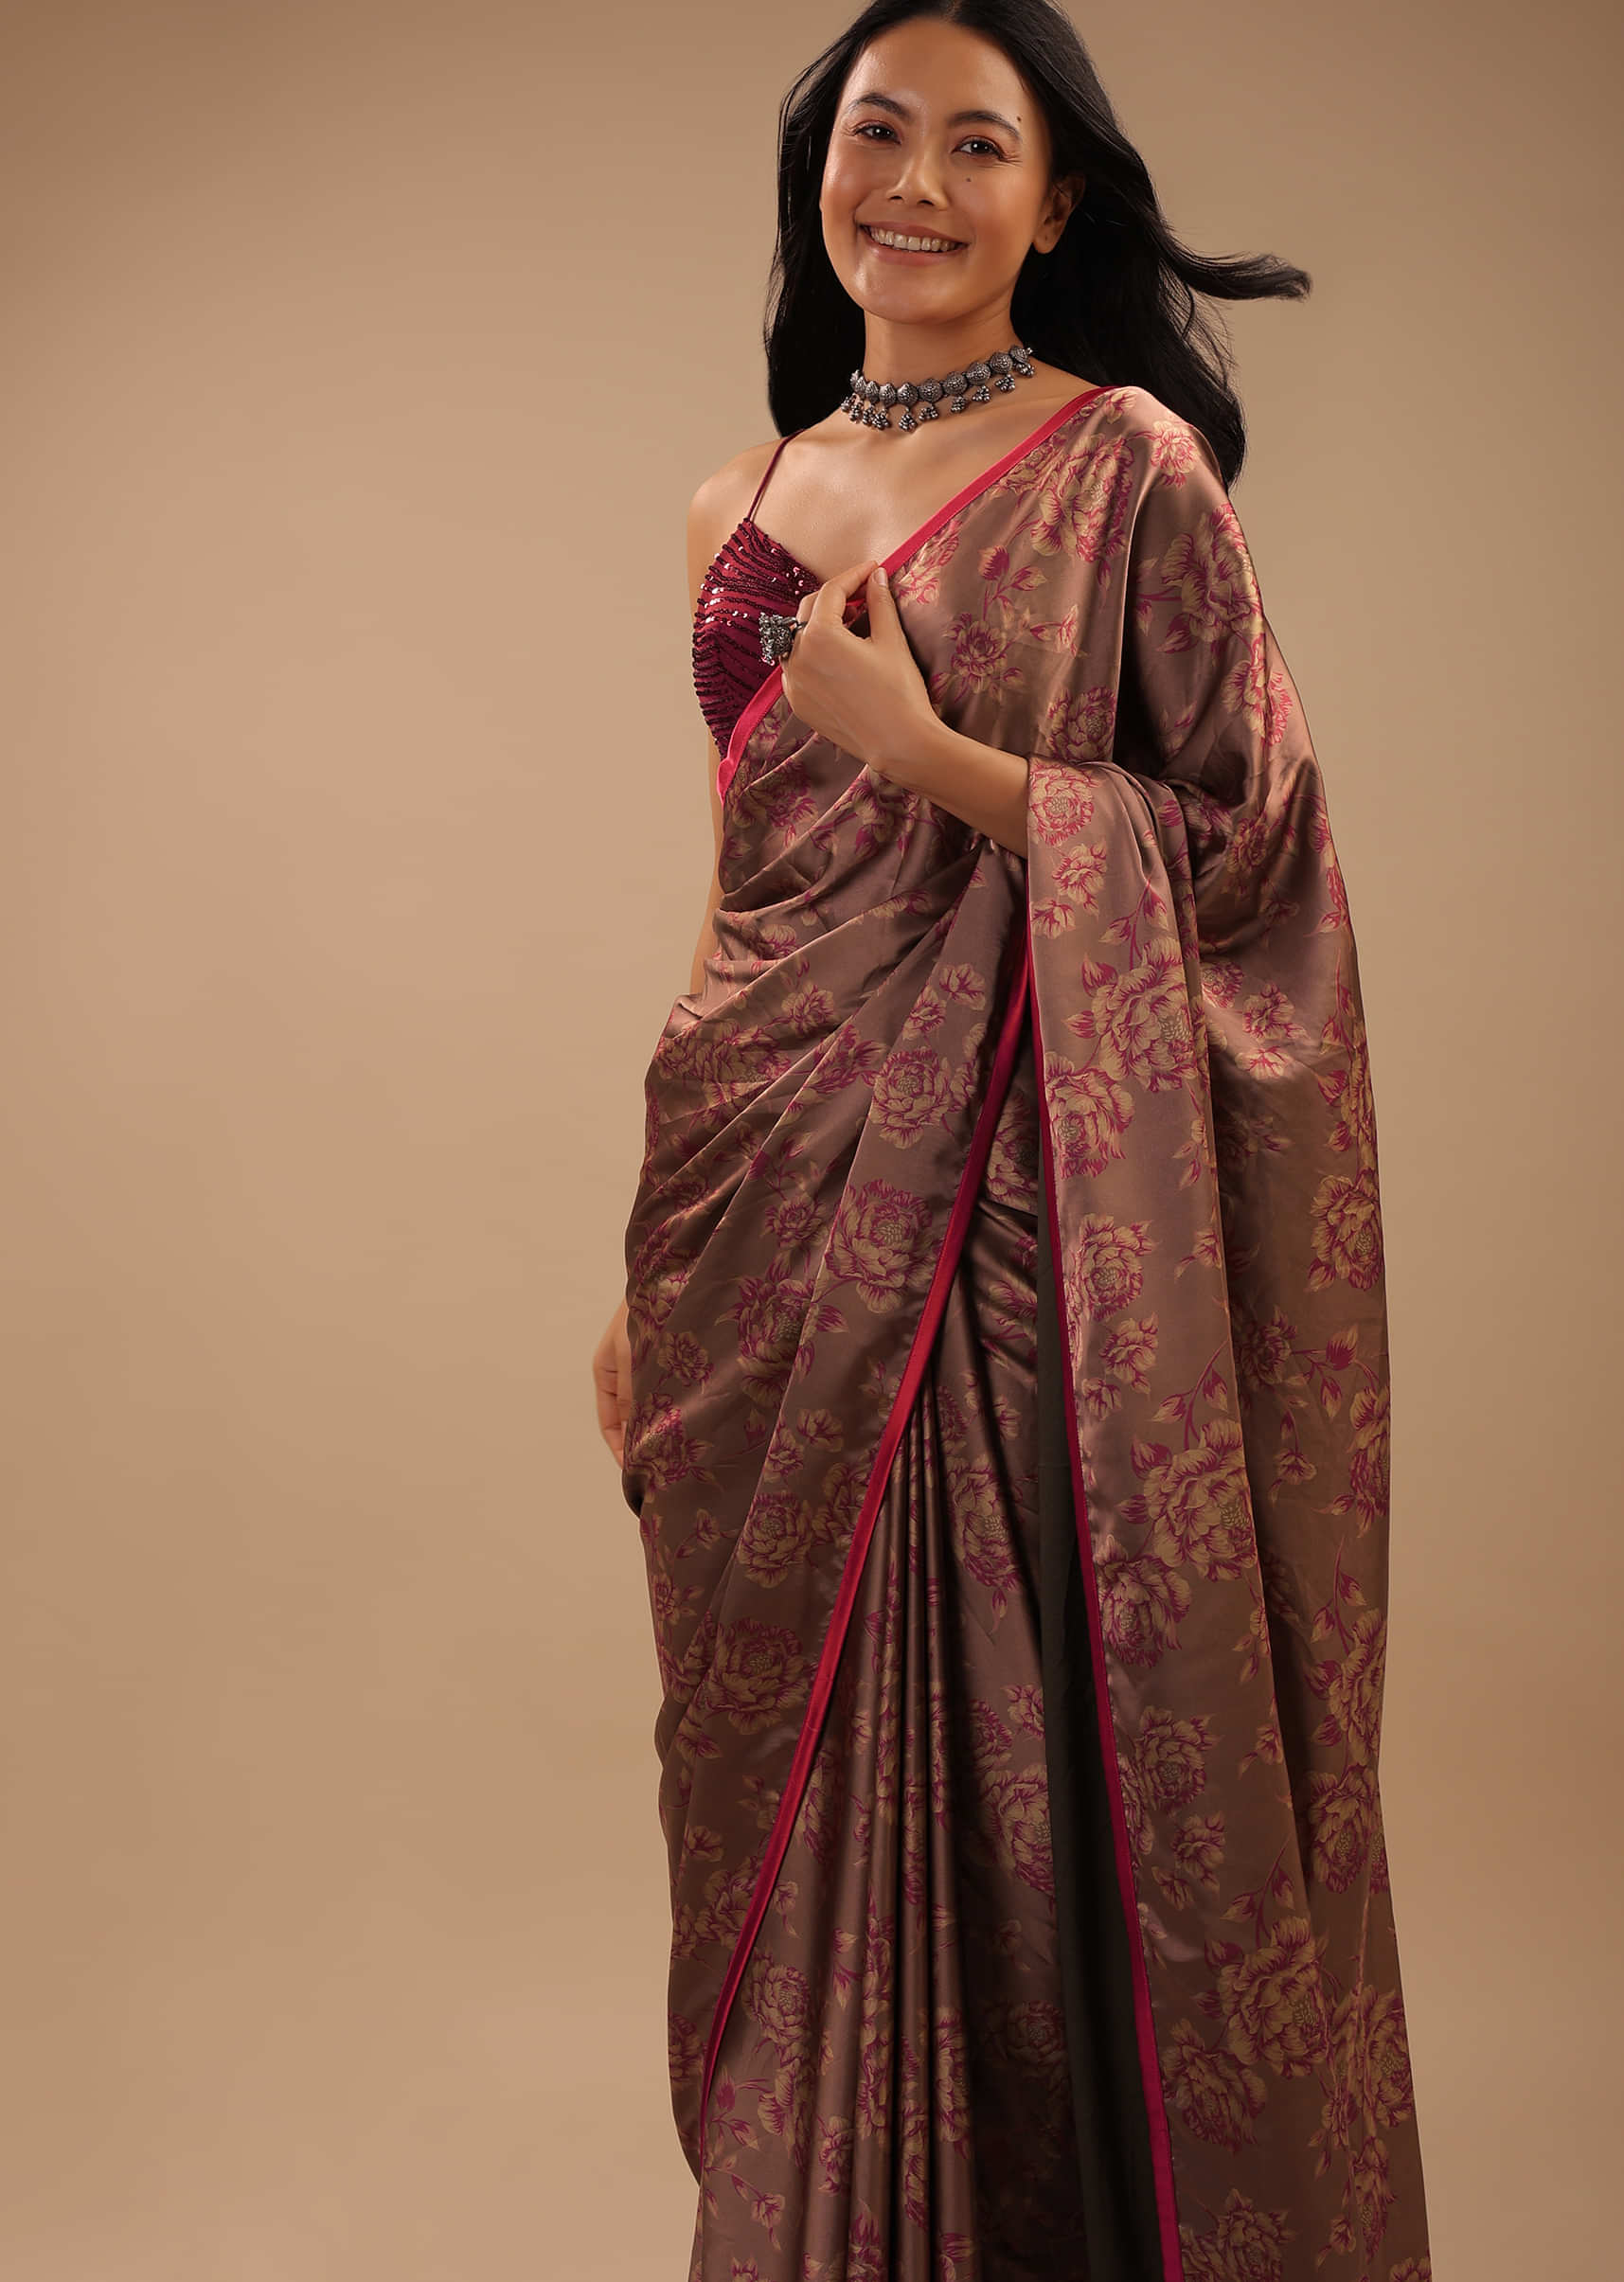 Old Rose Pink Saree With Satin Borders And Floral Print